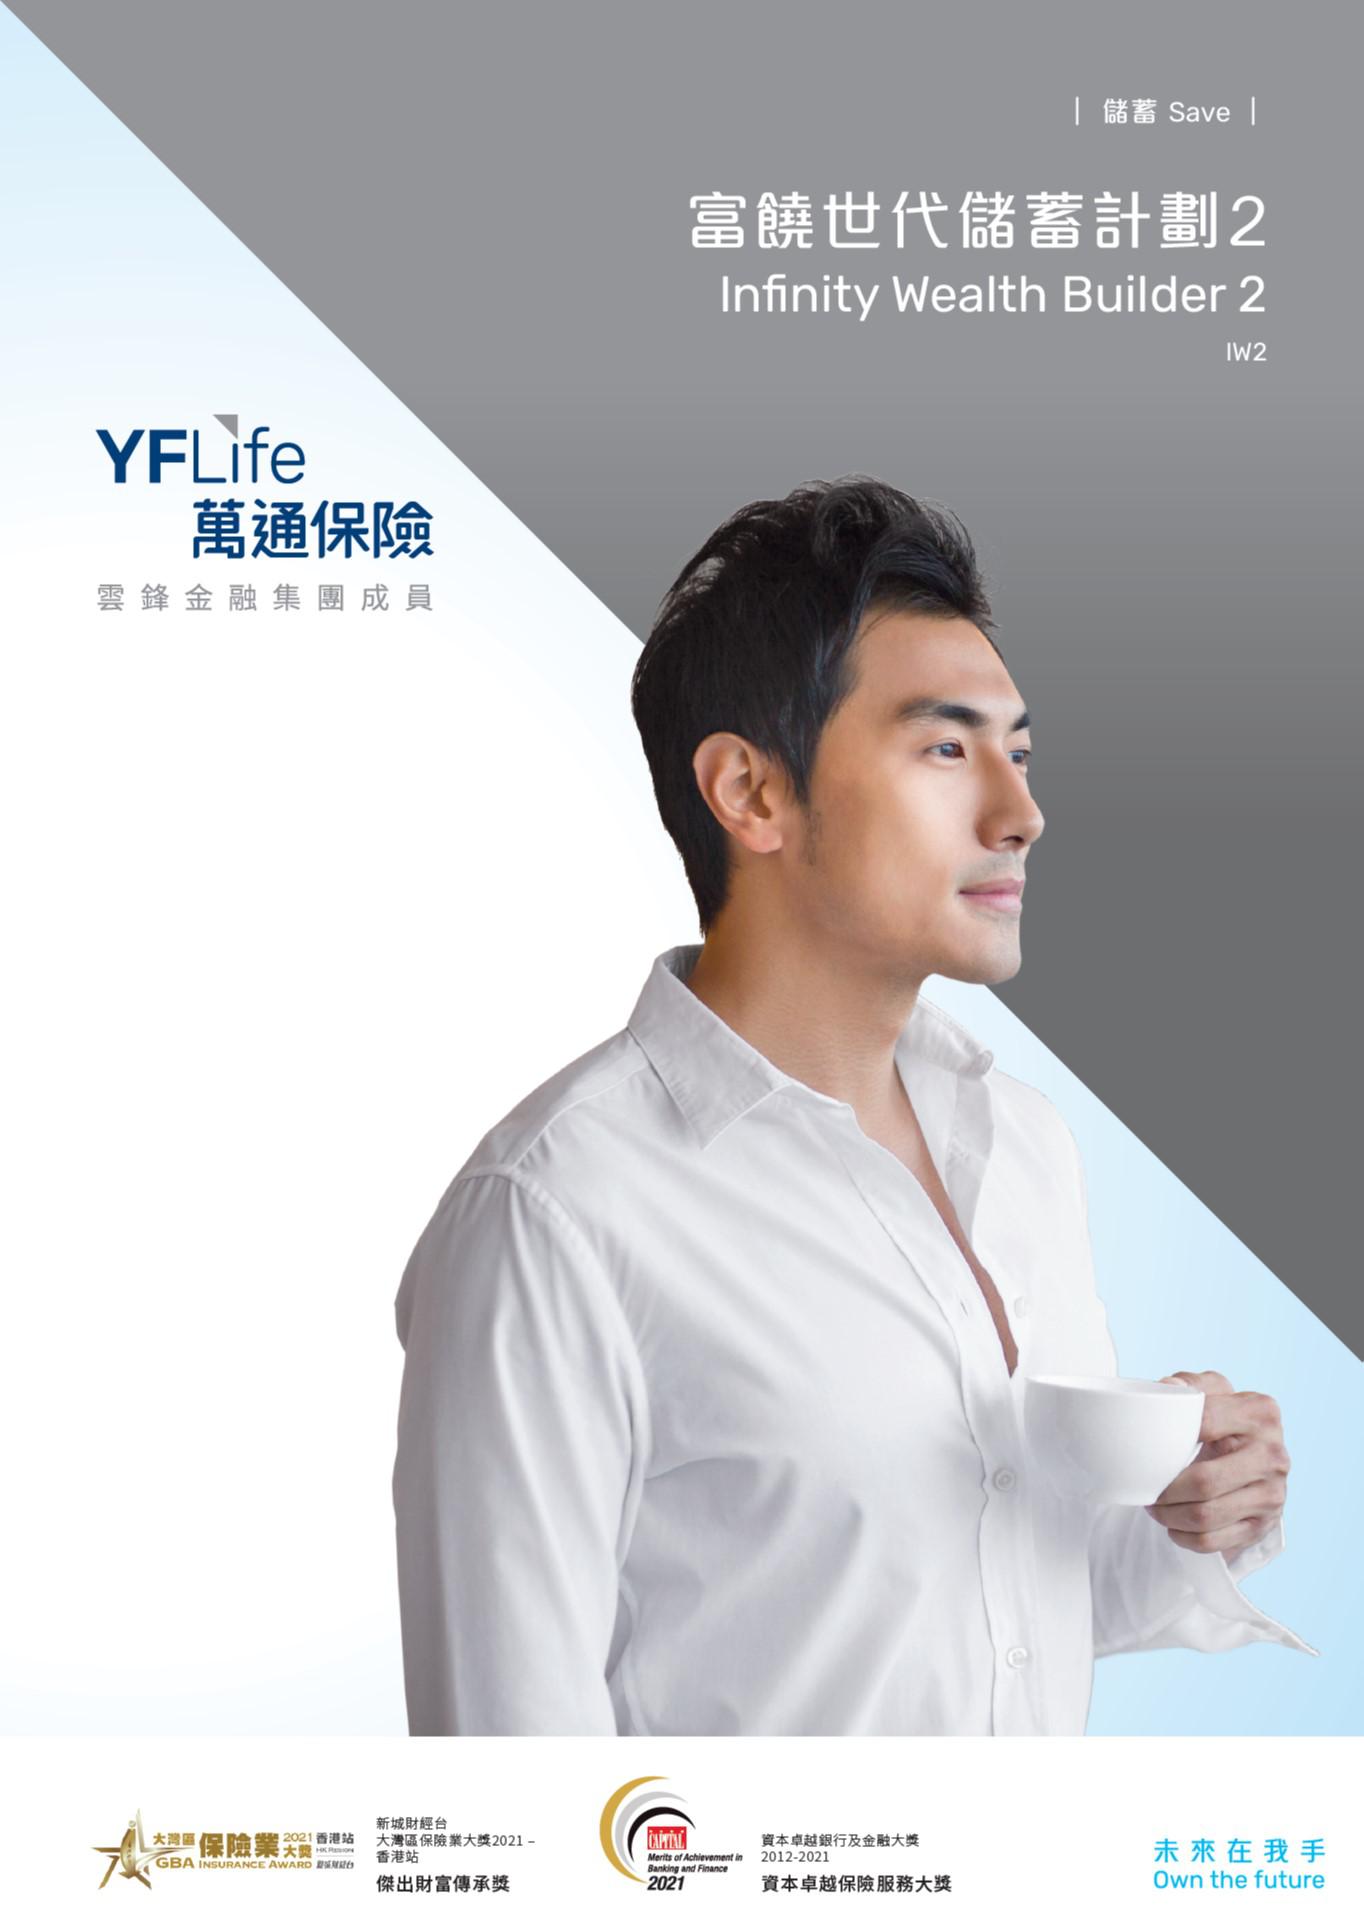 YF Life launches new enhanced Infinity Wealth Builder 2 with all-new multiple currency options to help customers achieve financial goals.